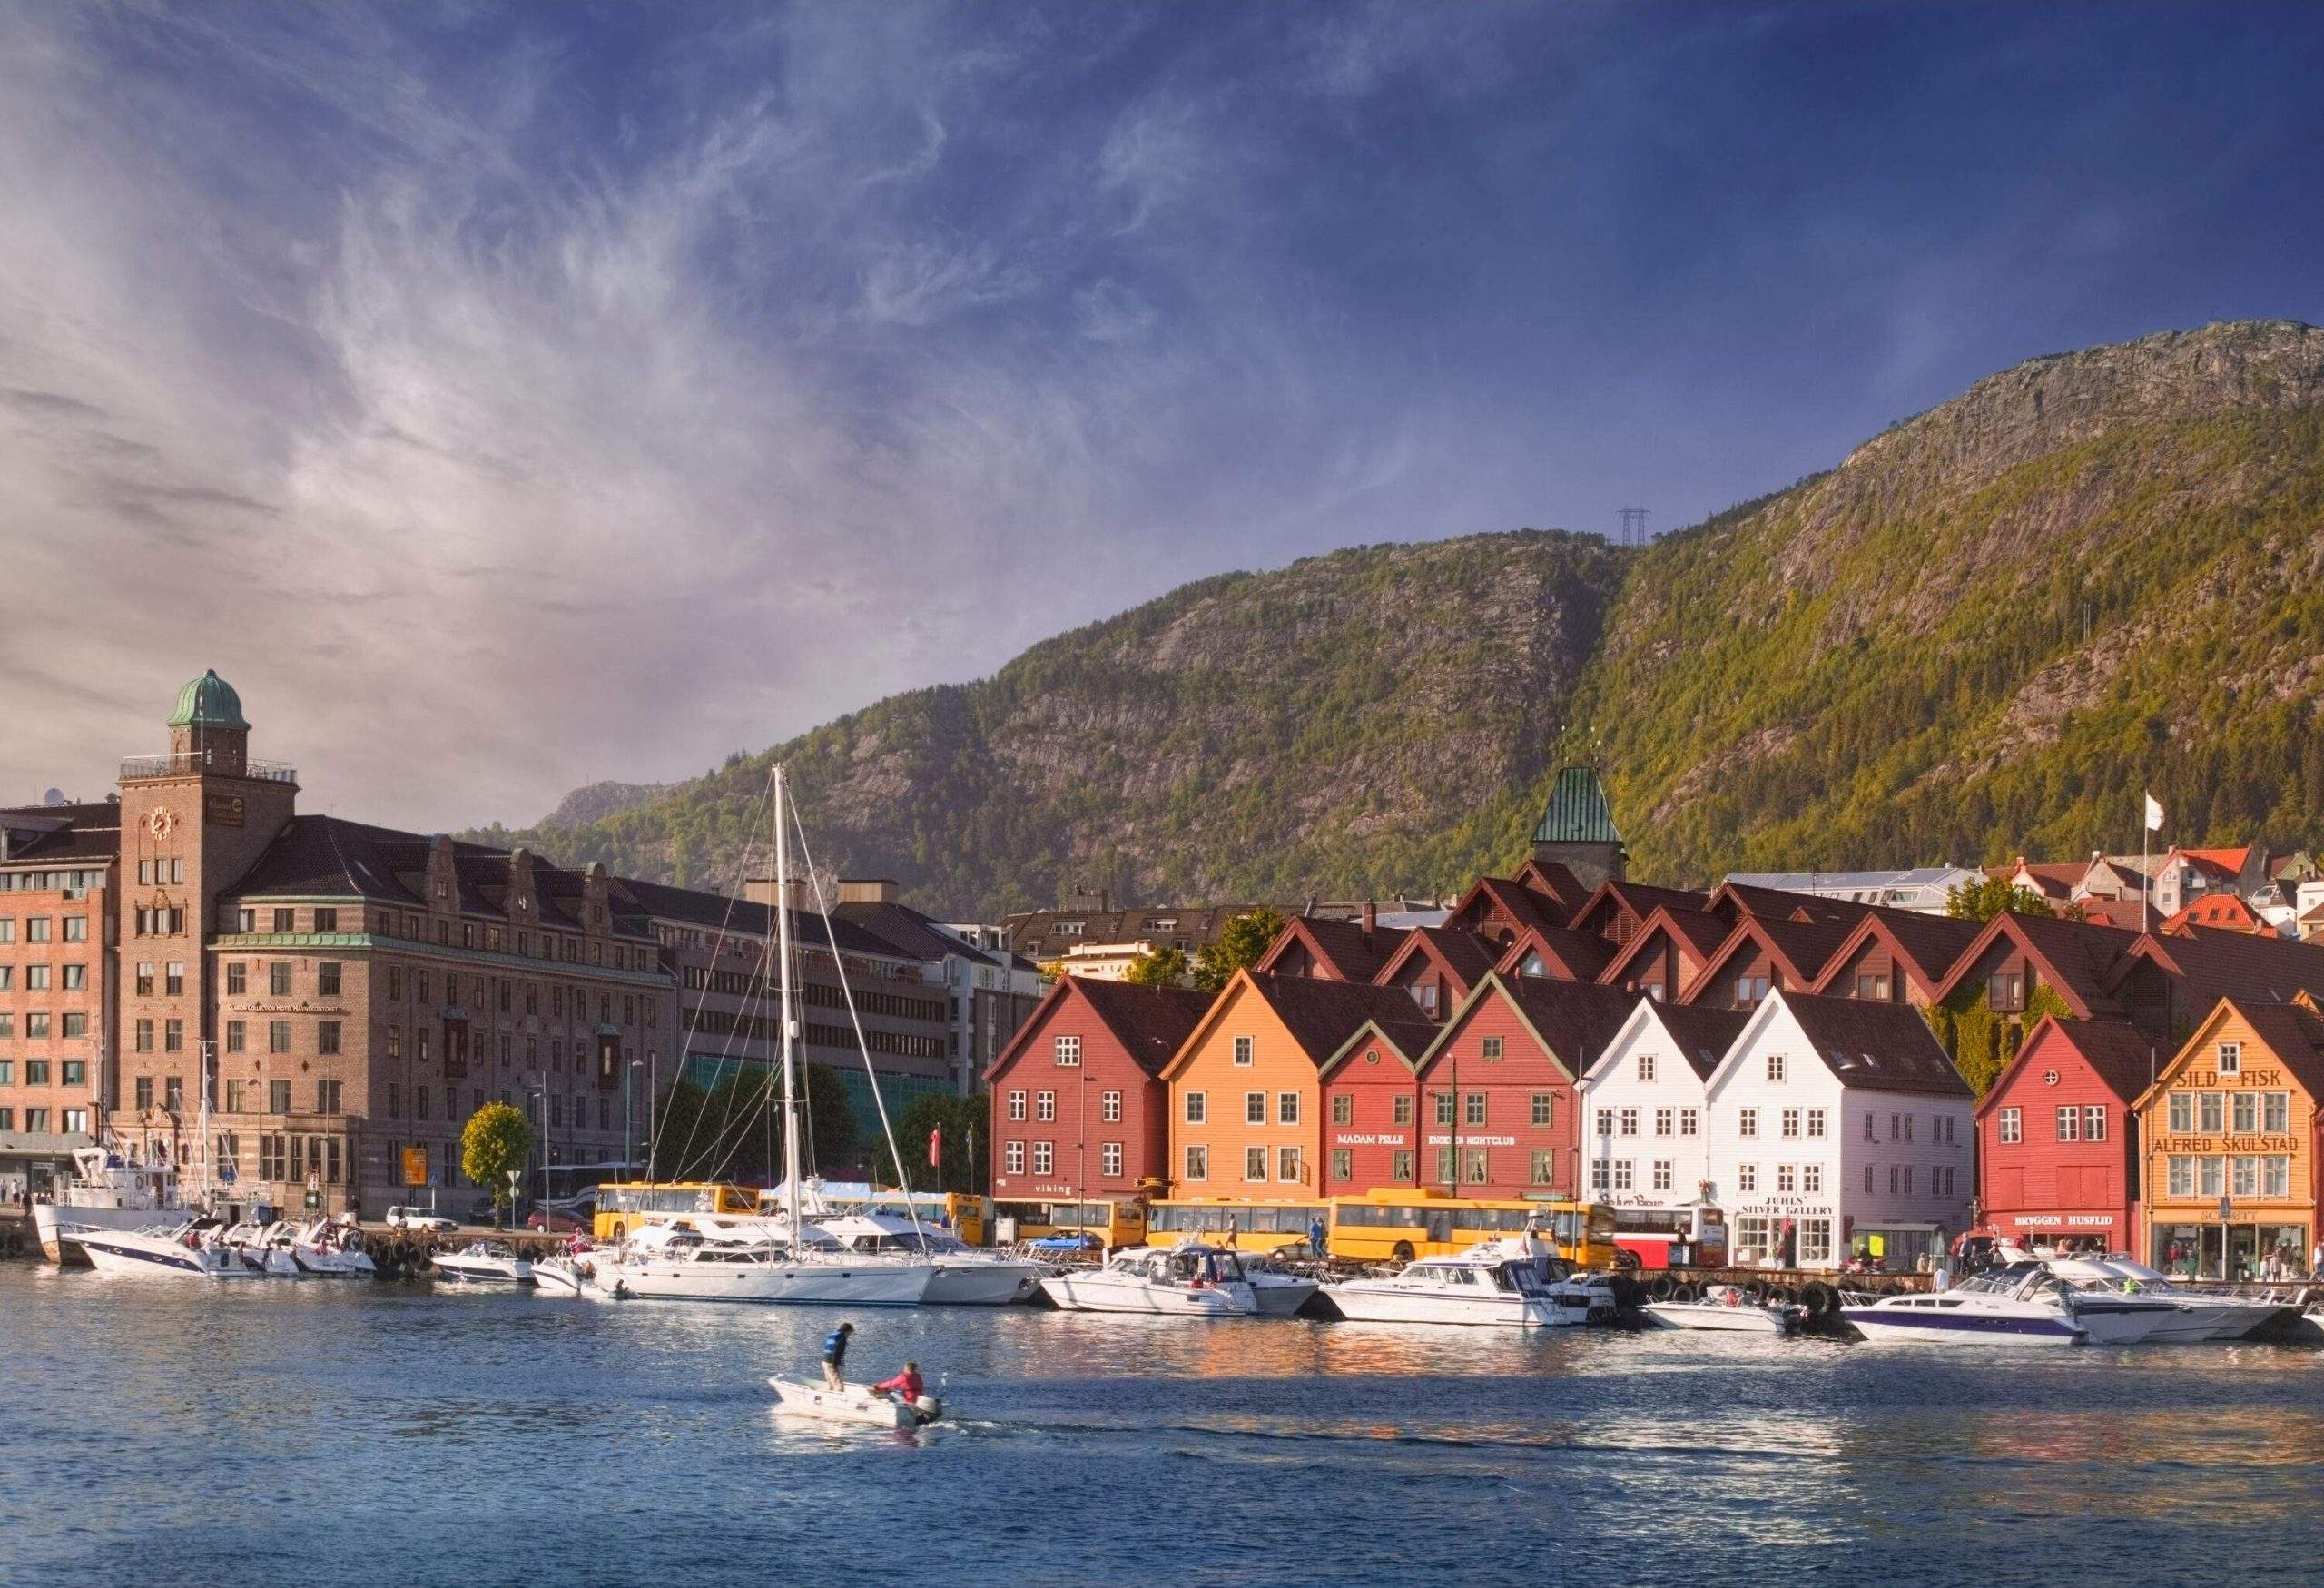 Compact, colourful buildings and houses on the mountain's foot surround the boats docked on the harbour.